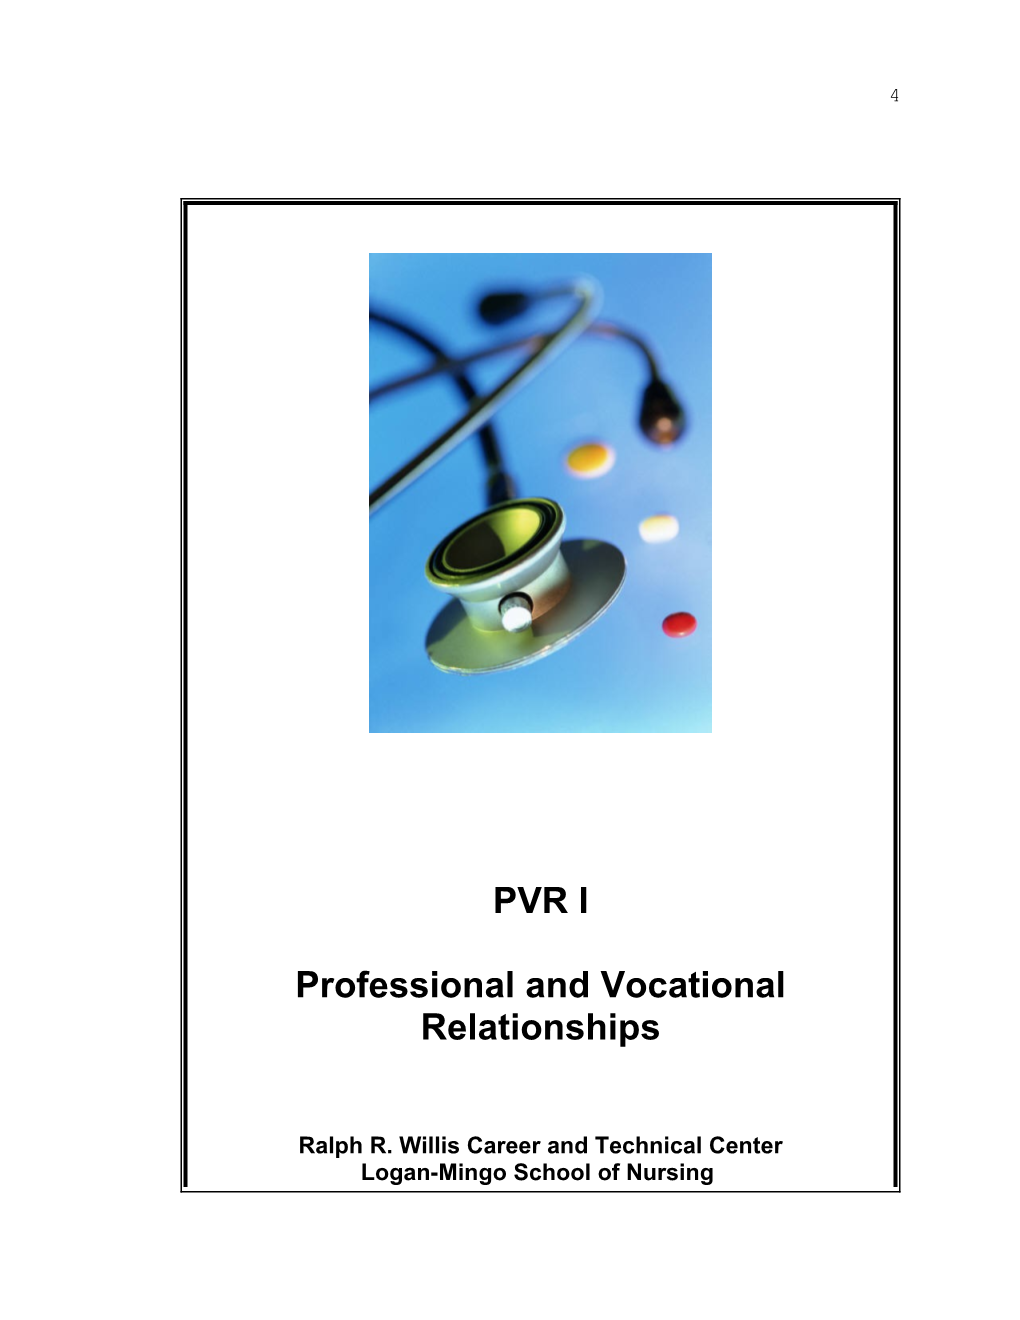 Professional and Vocational Relationships